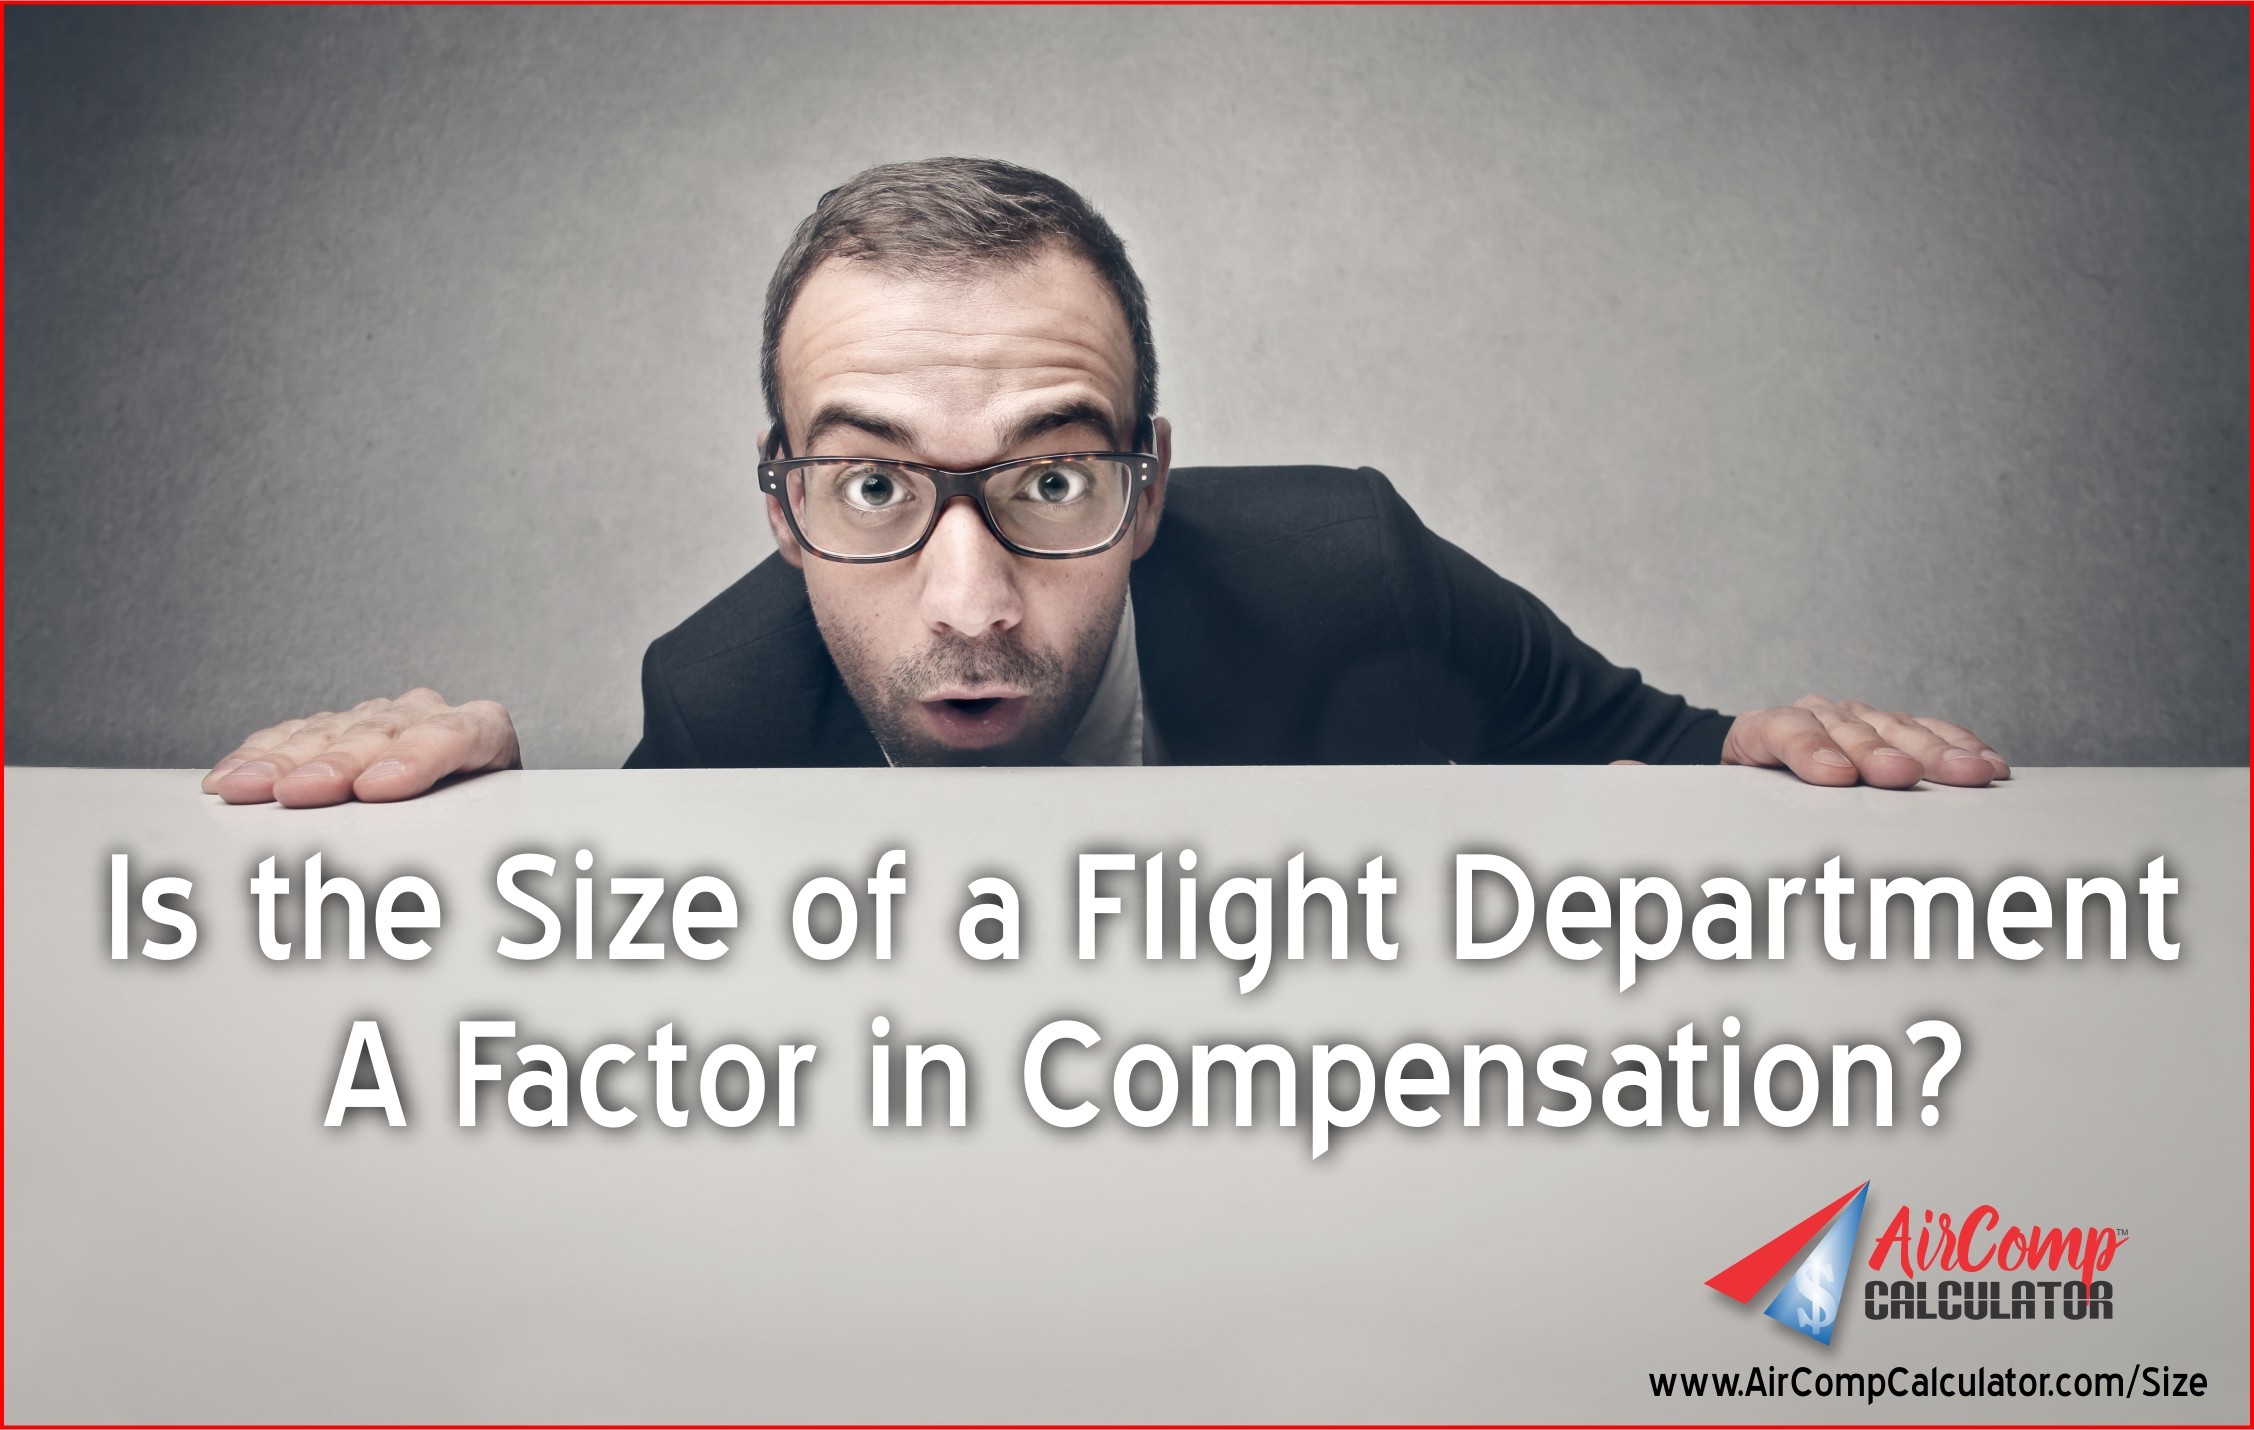 Is The Size of a Flight Department a Factor in Compensation?